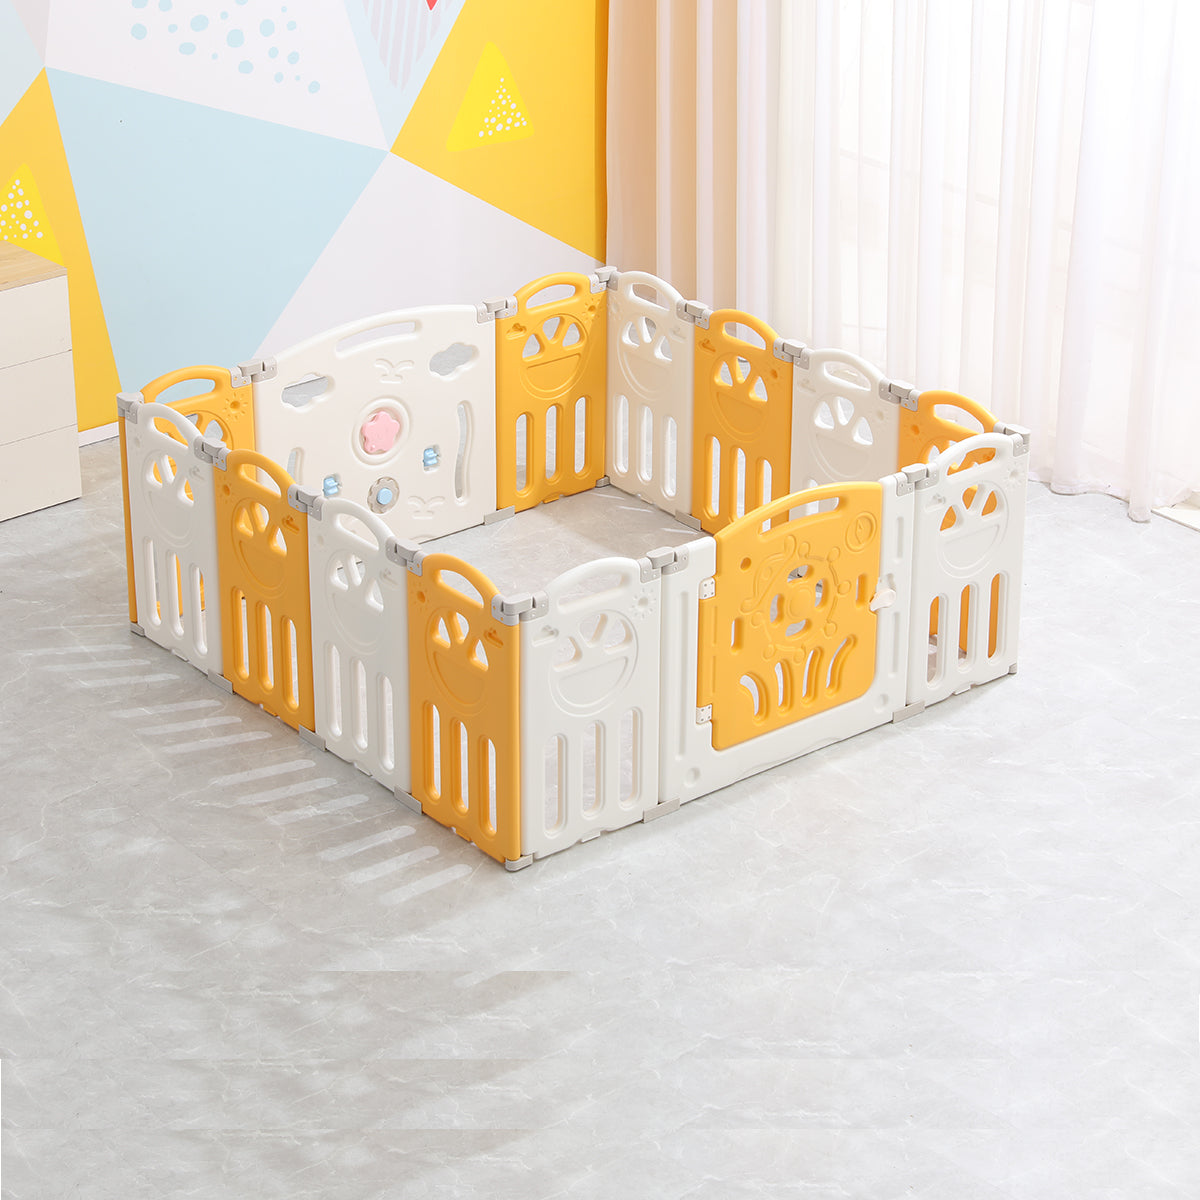 Royal Fortune Foldable Baby Playpen - 14 Panels - Buy Royal Fortune Foldable Baby Playpen - 14 Panels in Dubai - HOCC Dubai - Baby playground outdoor - Shop baby product - Shop Pet product - shop home decor and lighting in Dubai - HOCC Dubai - Baby playgr